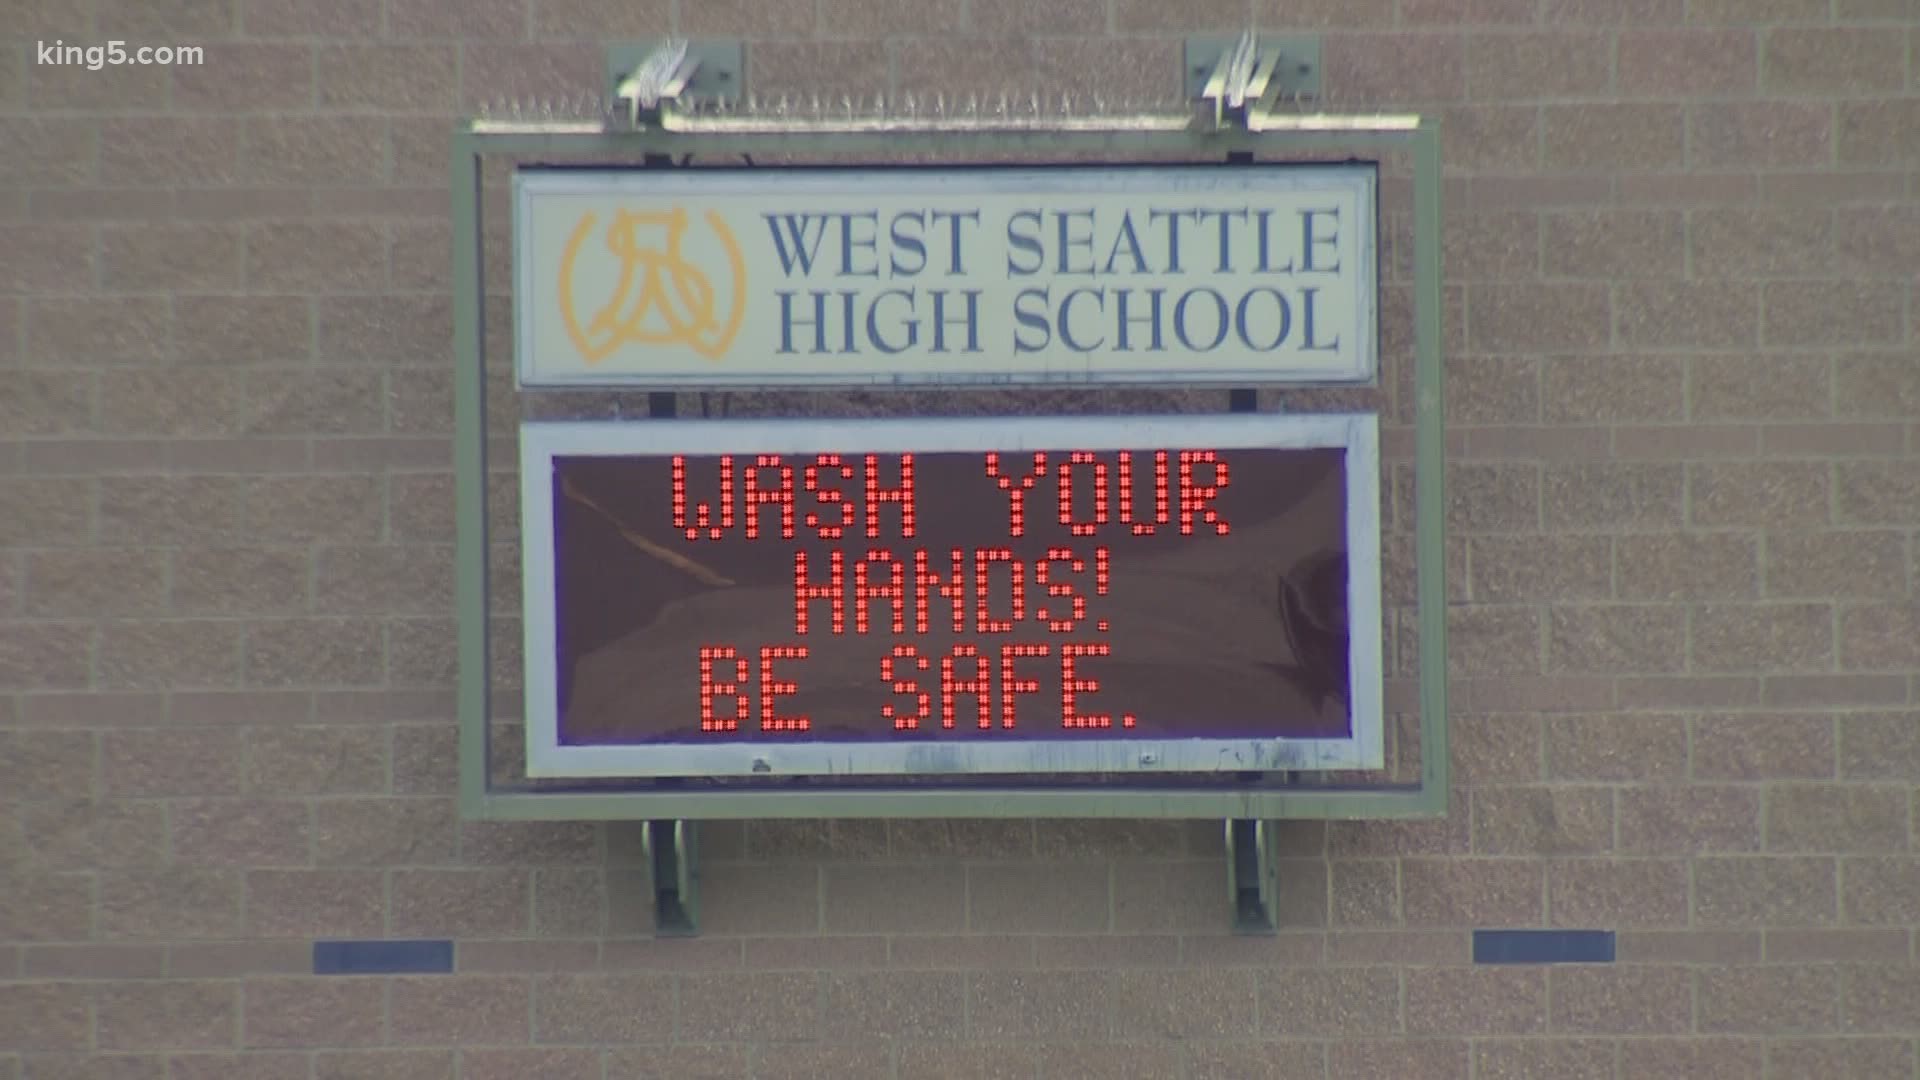 One Seattle doctor is concerned that the effects on children of not having school in the fall could supersede any coronavirus concerns.